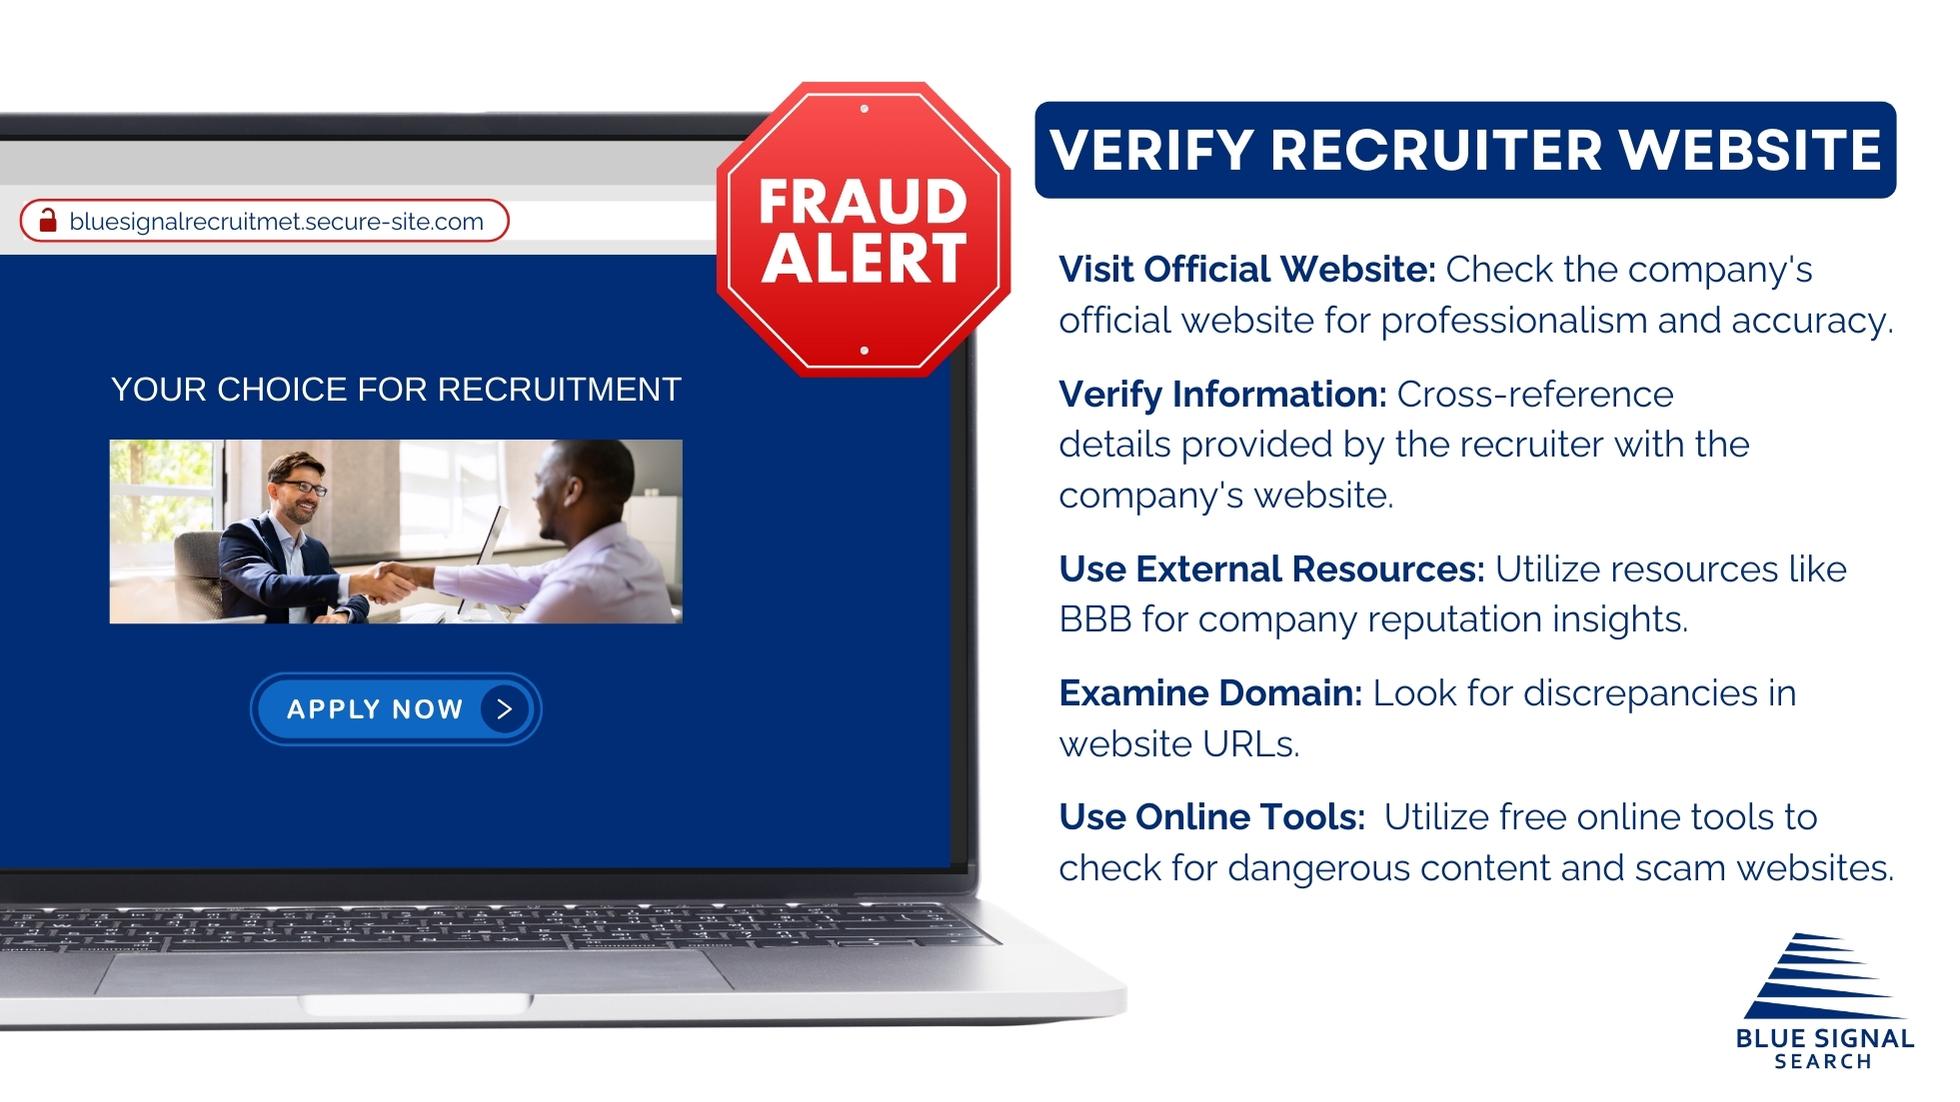 A laptop screen displaying a fake recruitment site with a 'Fraud Alert' sign, highlighting steps to verify the authenticity of a recruiter's website.